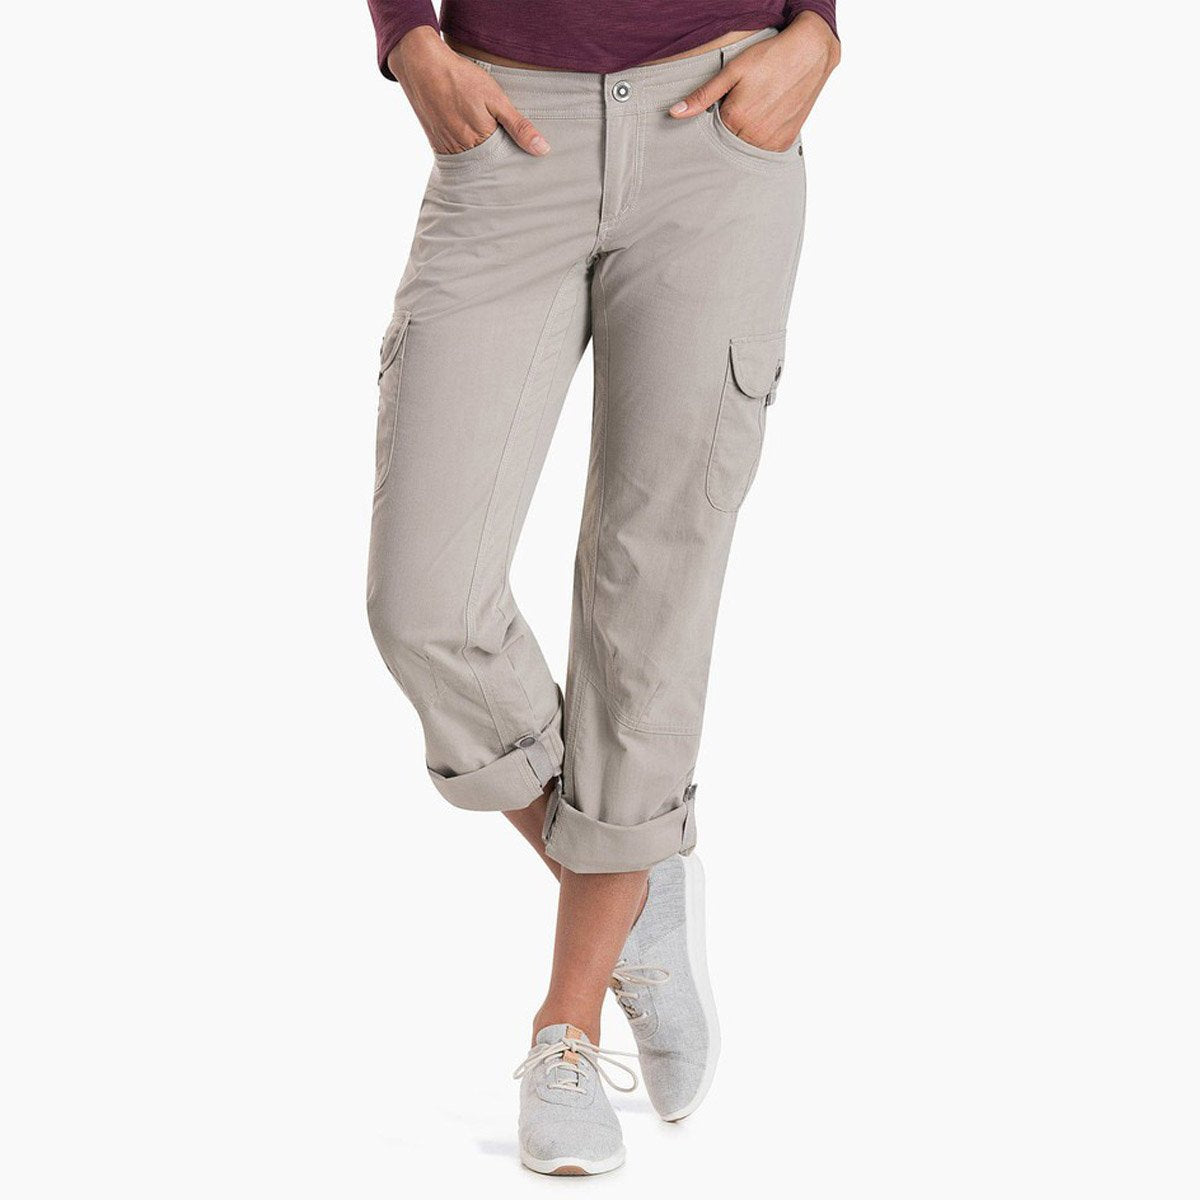 Women's Vantage Pant - Gearhead Outfitters